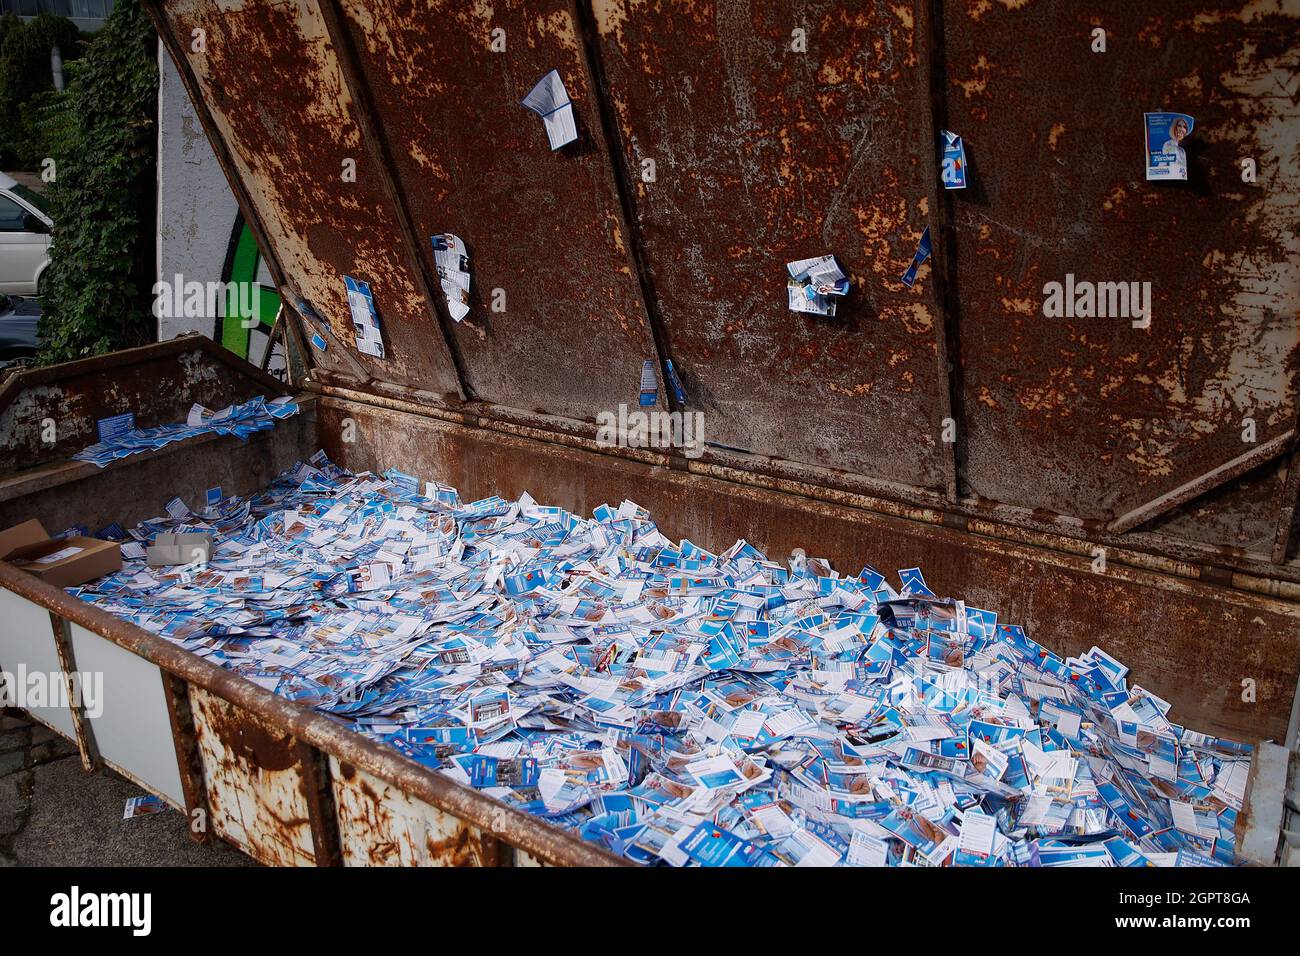 Berlin, Germany. 30th Sep, 2021. Containers with AfD election campaign flyers are displayed at an open day at a recycling yard. In the containers, non-distributed AfD election campaign flyers are publicly displayed. The artist group 'Zentrum für Politische Schönheit' (ZPS) has declared itself responsible for a fictitious flyer service. Credit: Carsten Koall/dpa/Alamy Live News Stock Photo